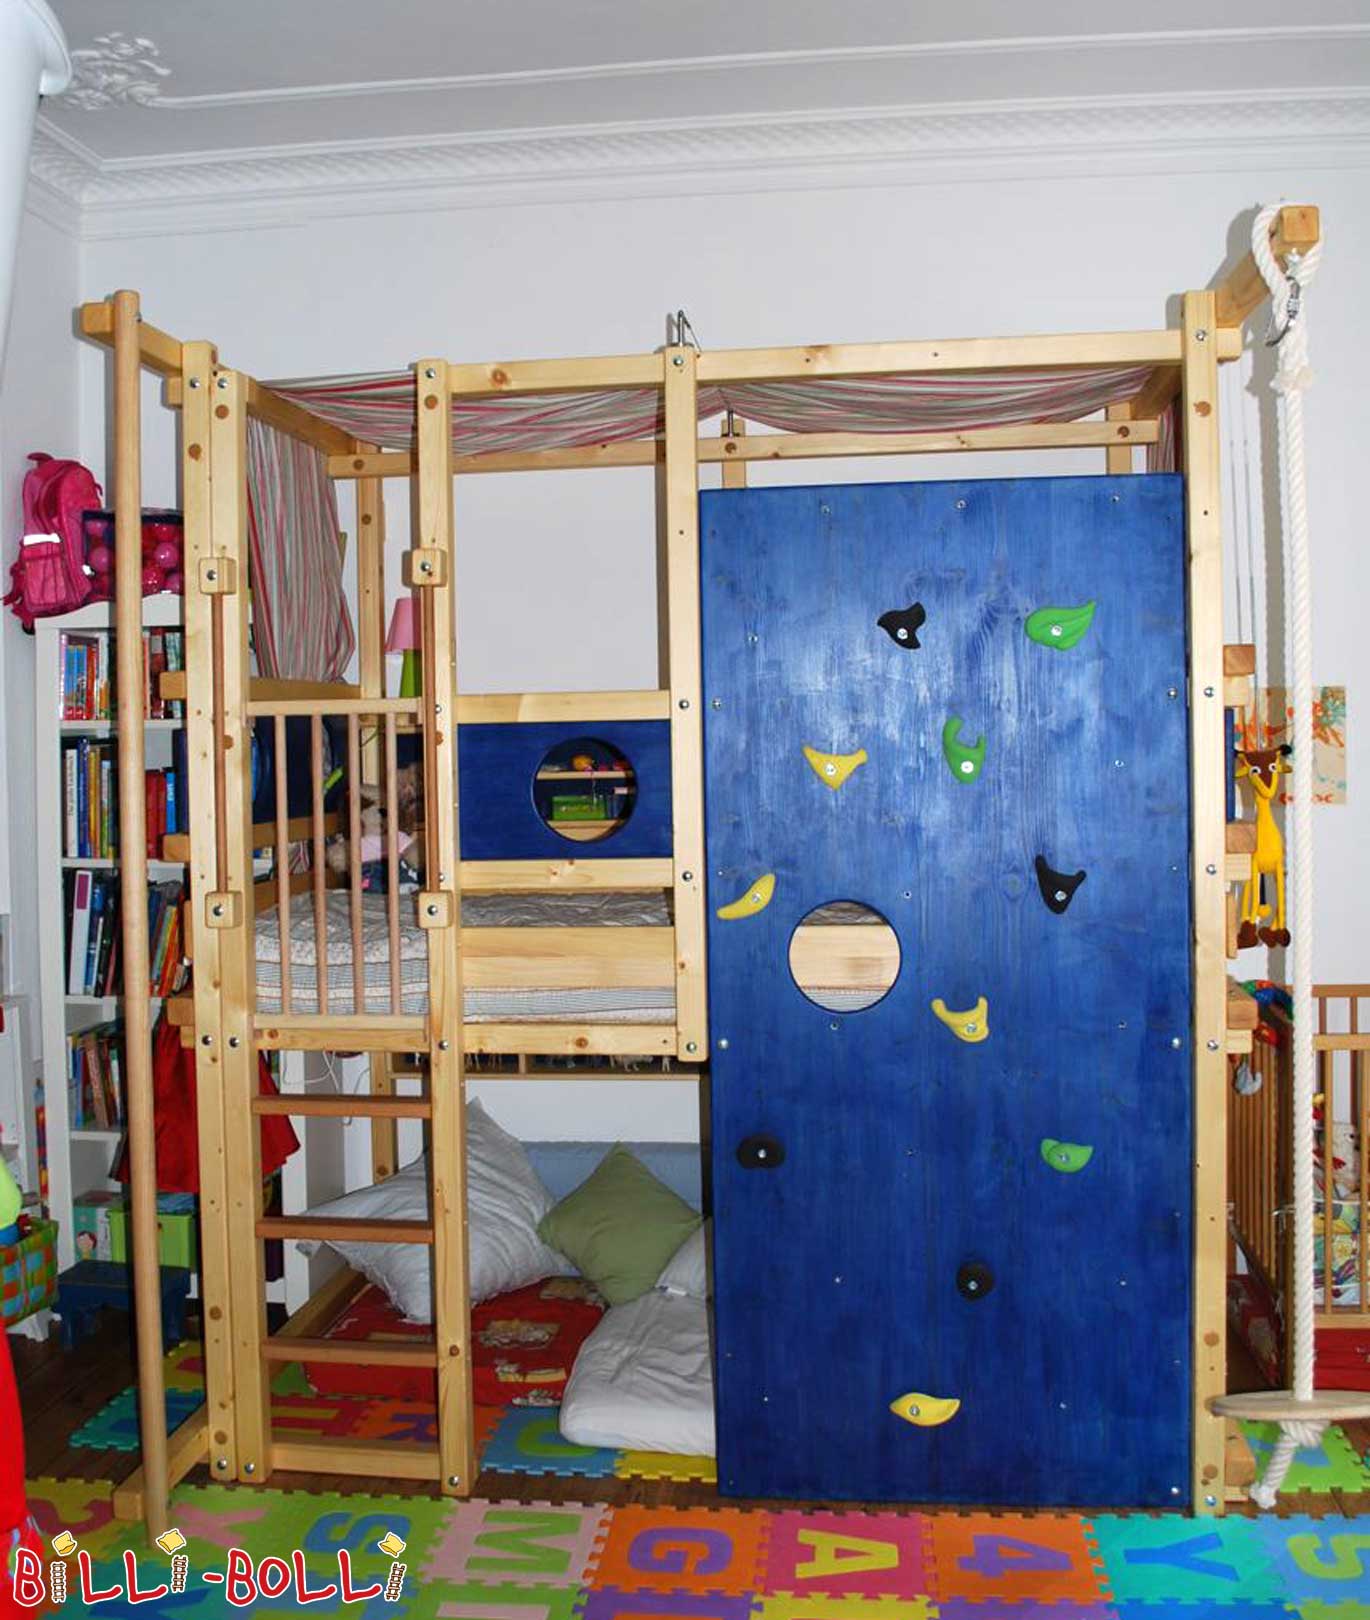 Today I’d like to finally send you a few photos of our fantastic Billi-Bolli b … (Loft Bed Adjustable by Age)